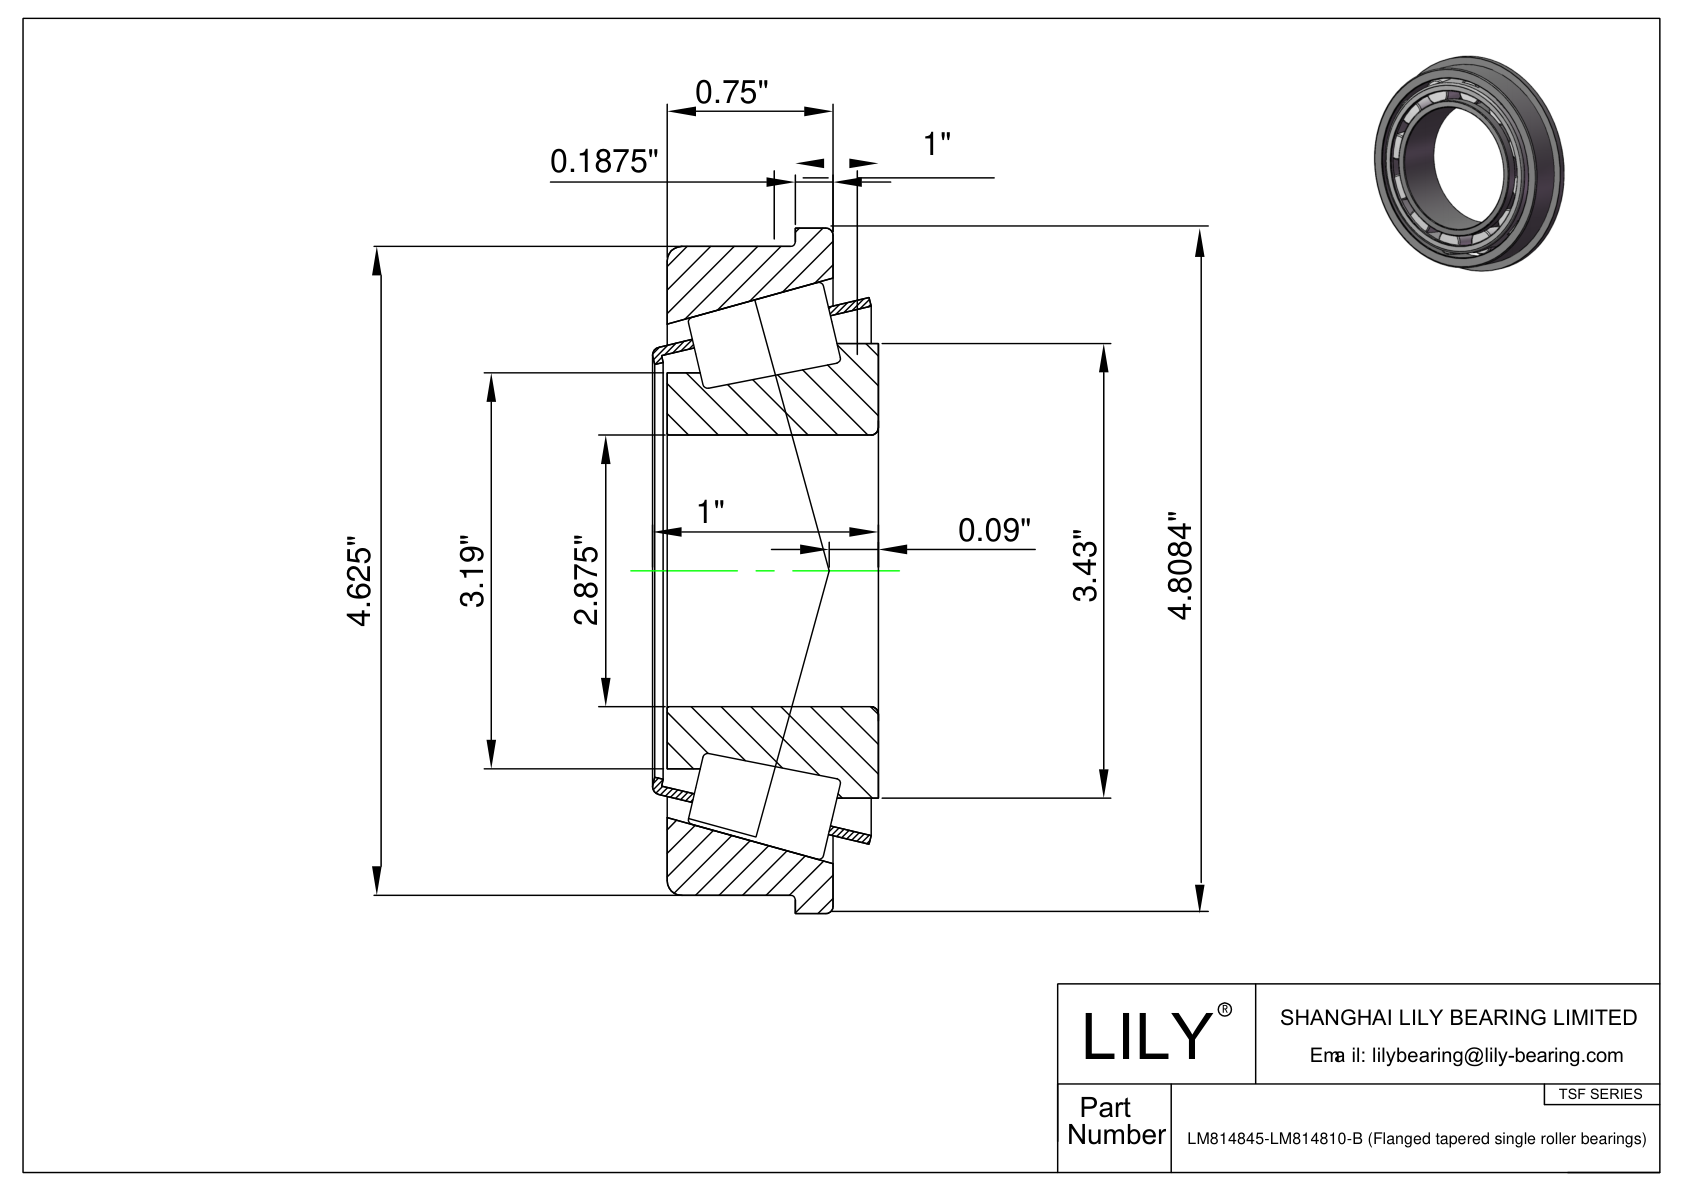 LM814845-LM814810-B TSF (Tapered Single Roller Bearings with Flange) (Imperial) cad drawing